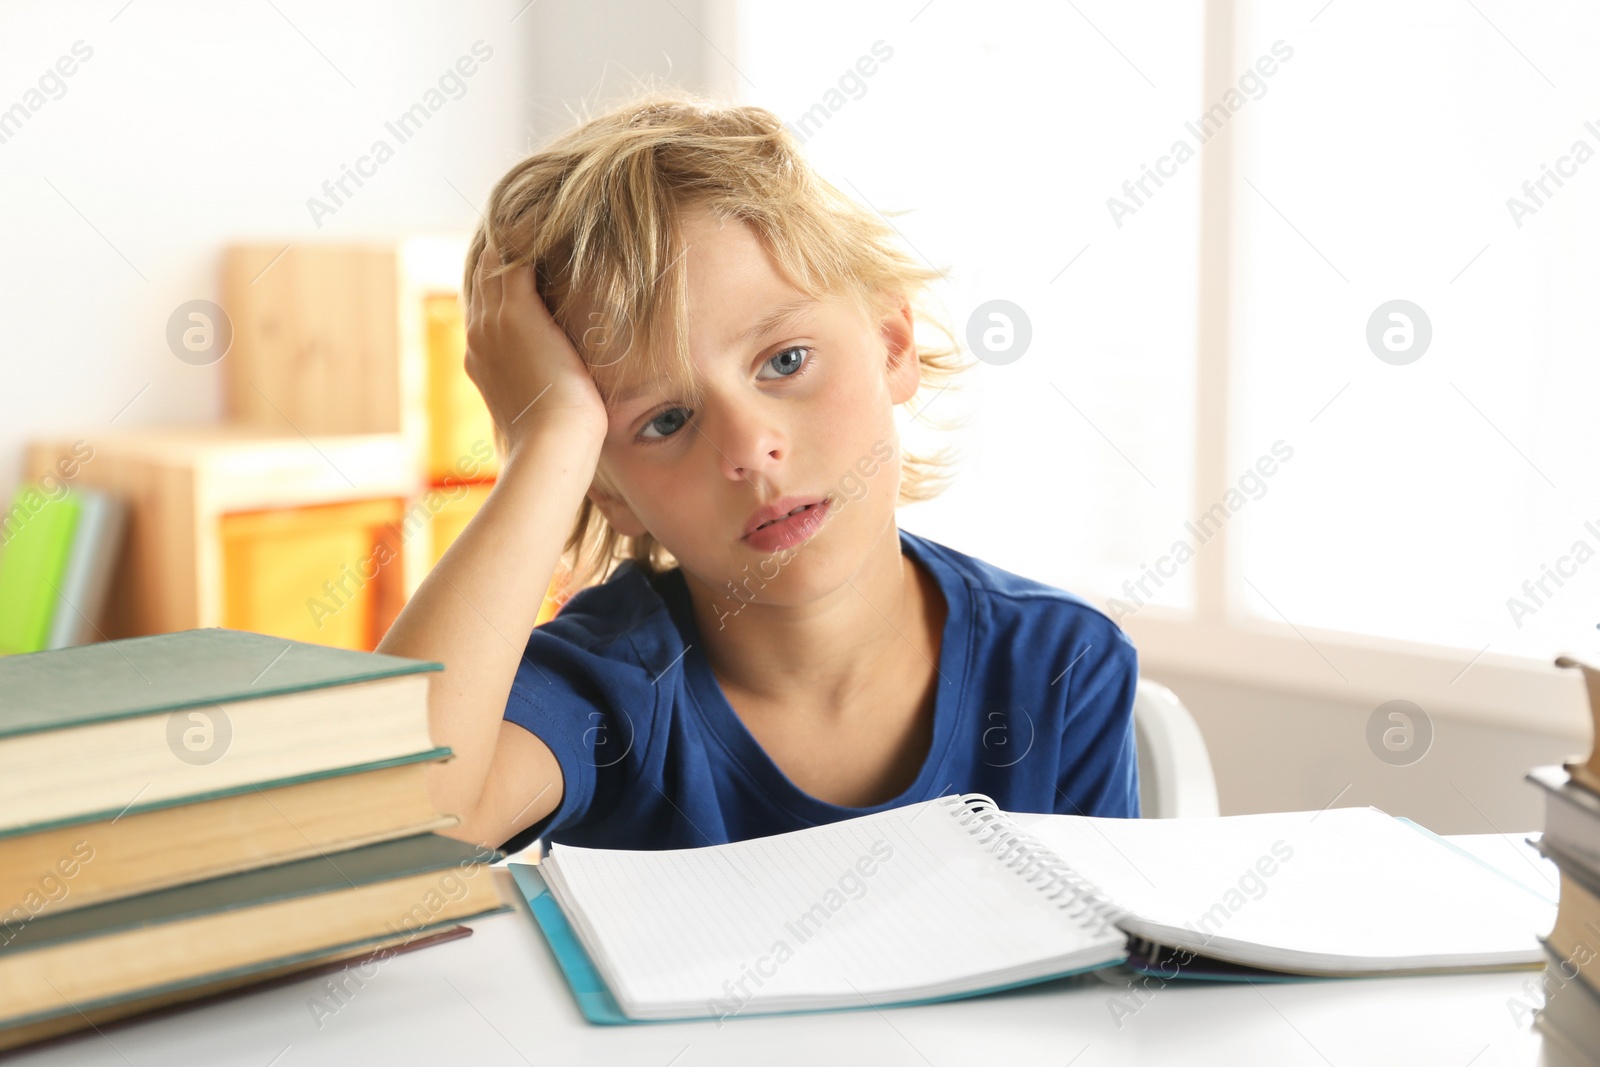 Photo of Sad little boy doing homework at table indoors